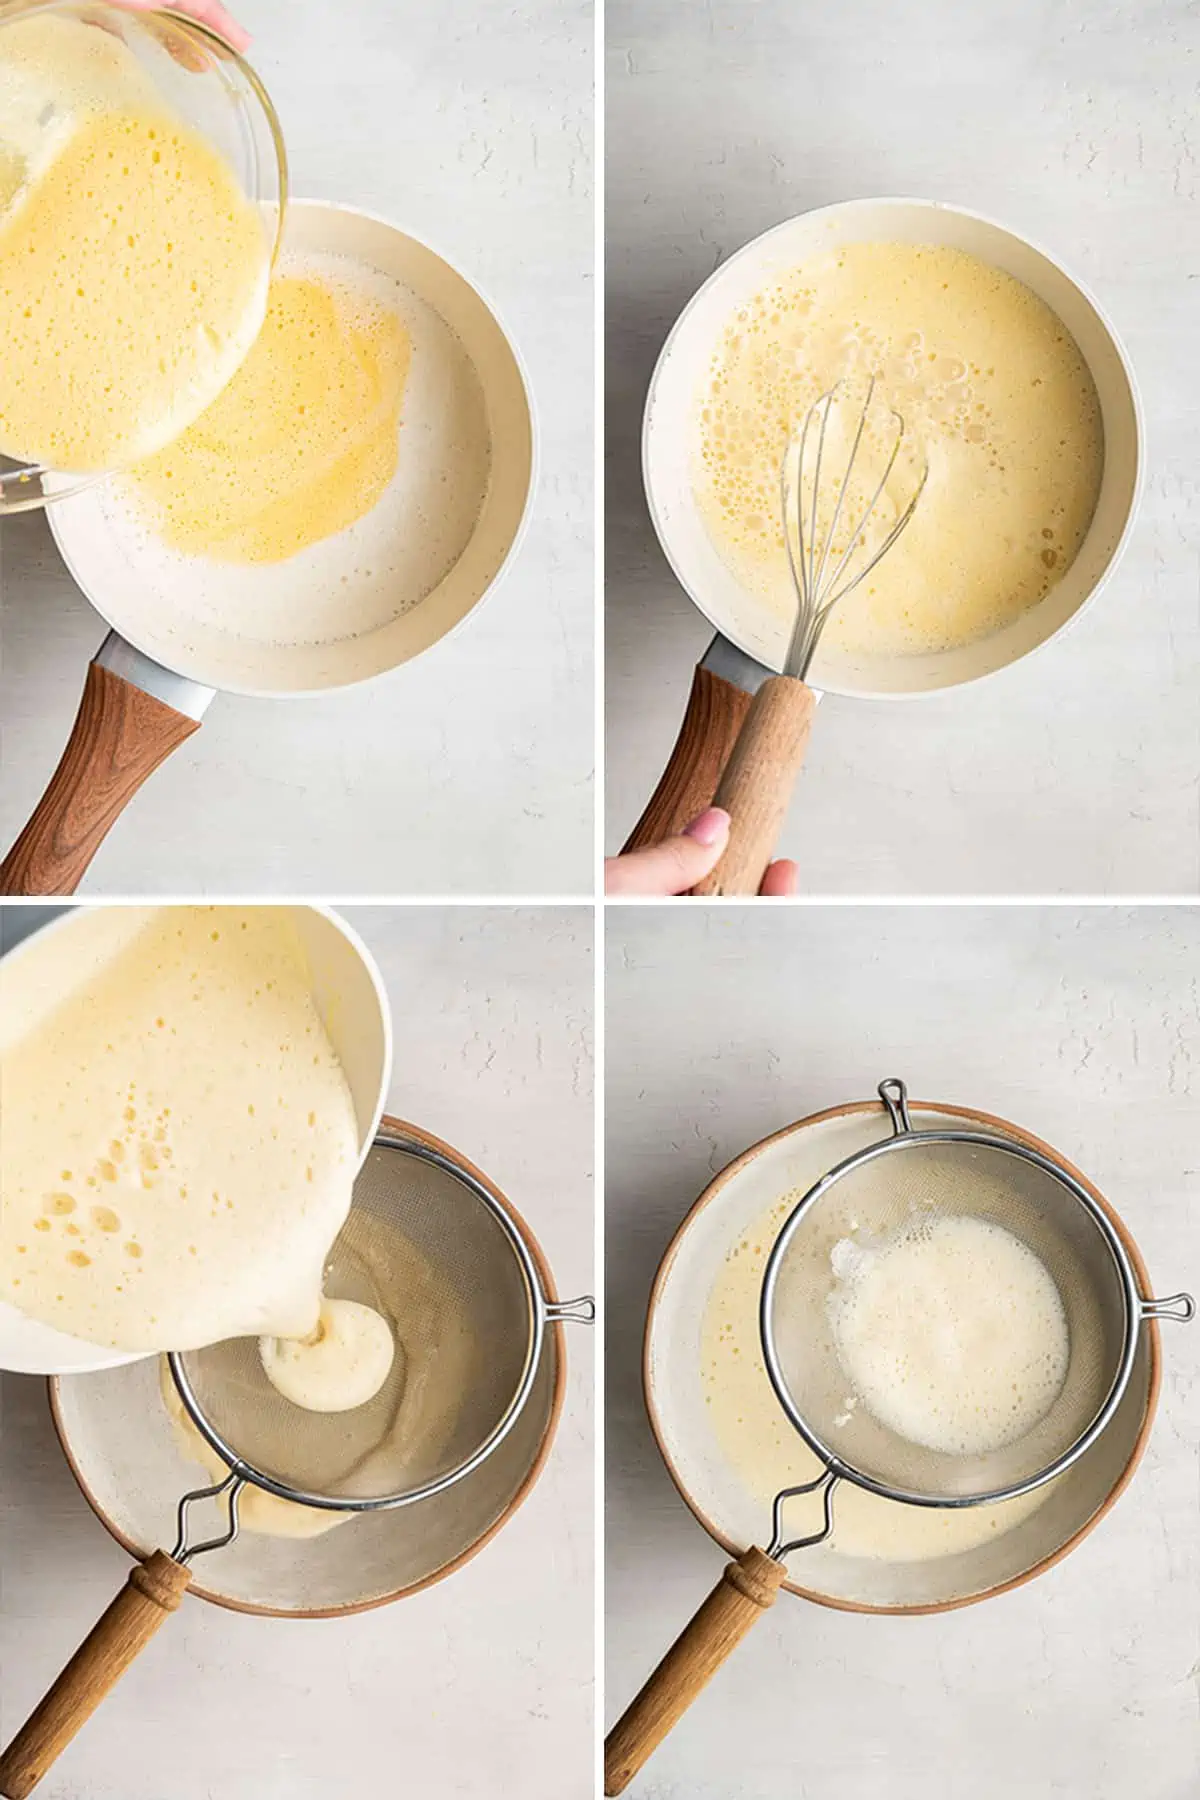 Four pictures: first, tempered egg yolks and sugar being poured into a saucepan with hot milk and cream; second, a hand whisking that mixture in the saucepan; third, the mixture being poured through a sieve into a bowl; and fourth, the bowl full of eggnog, with the sieve on top of the bowl